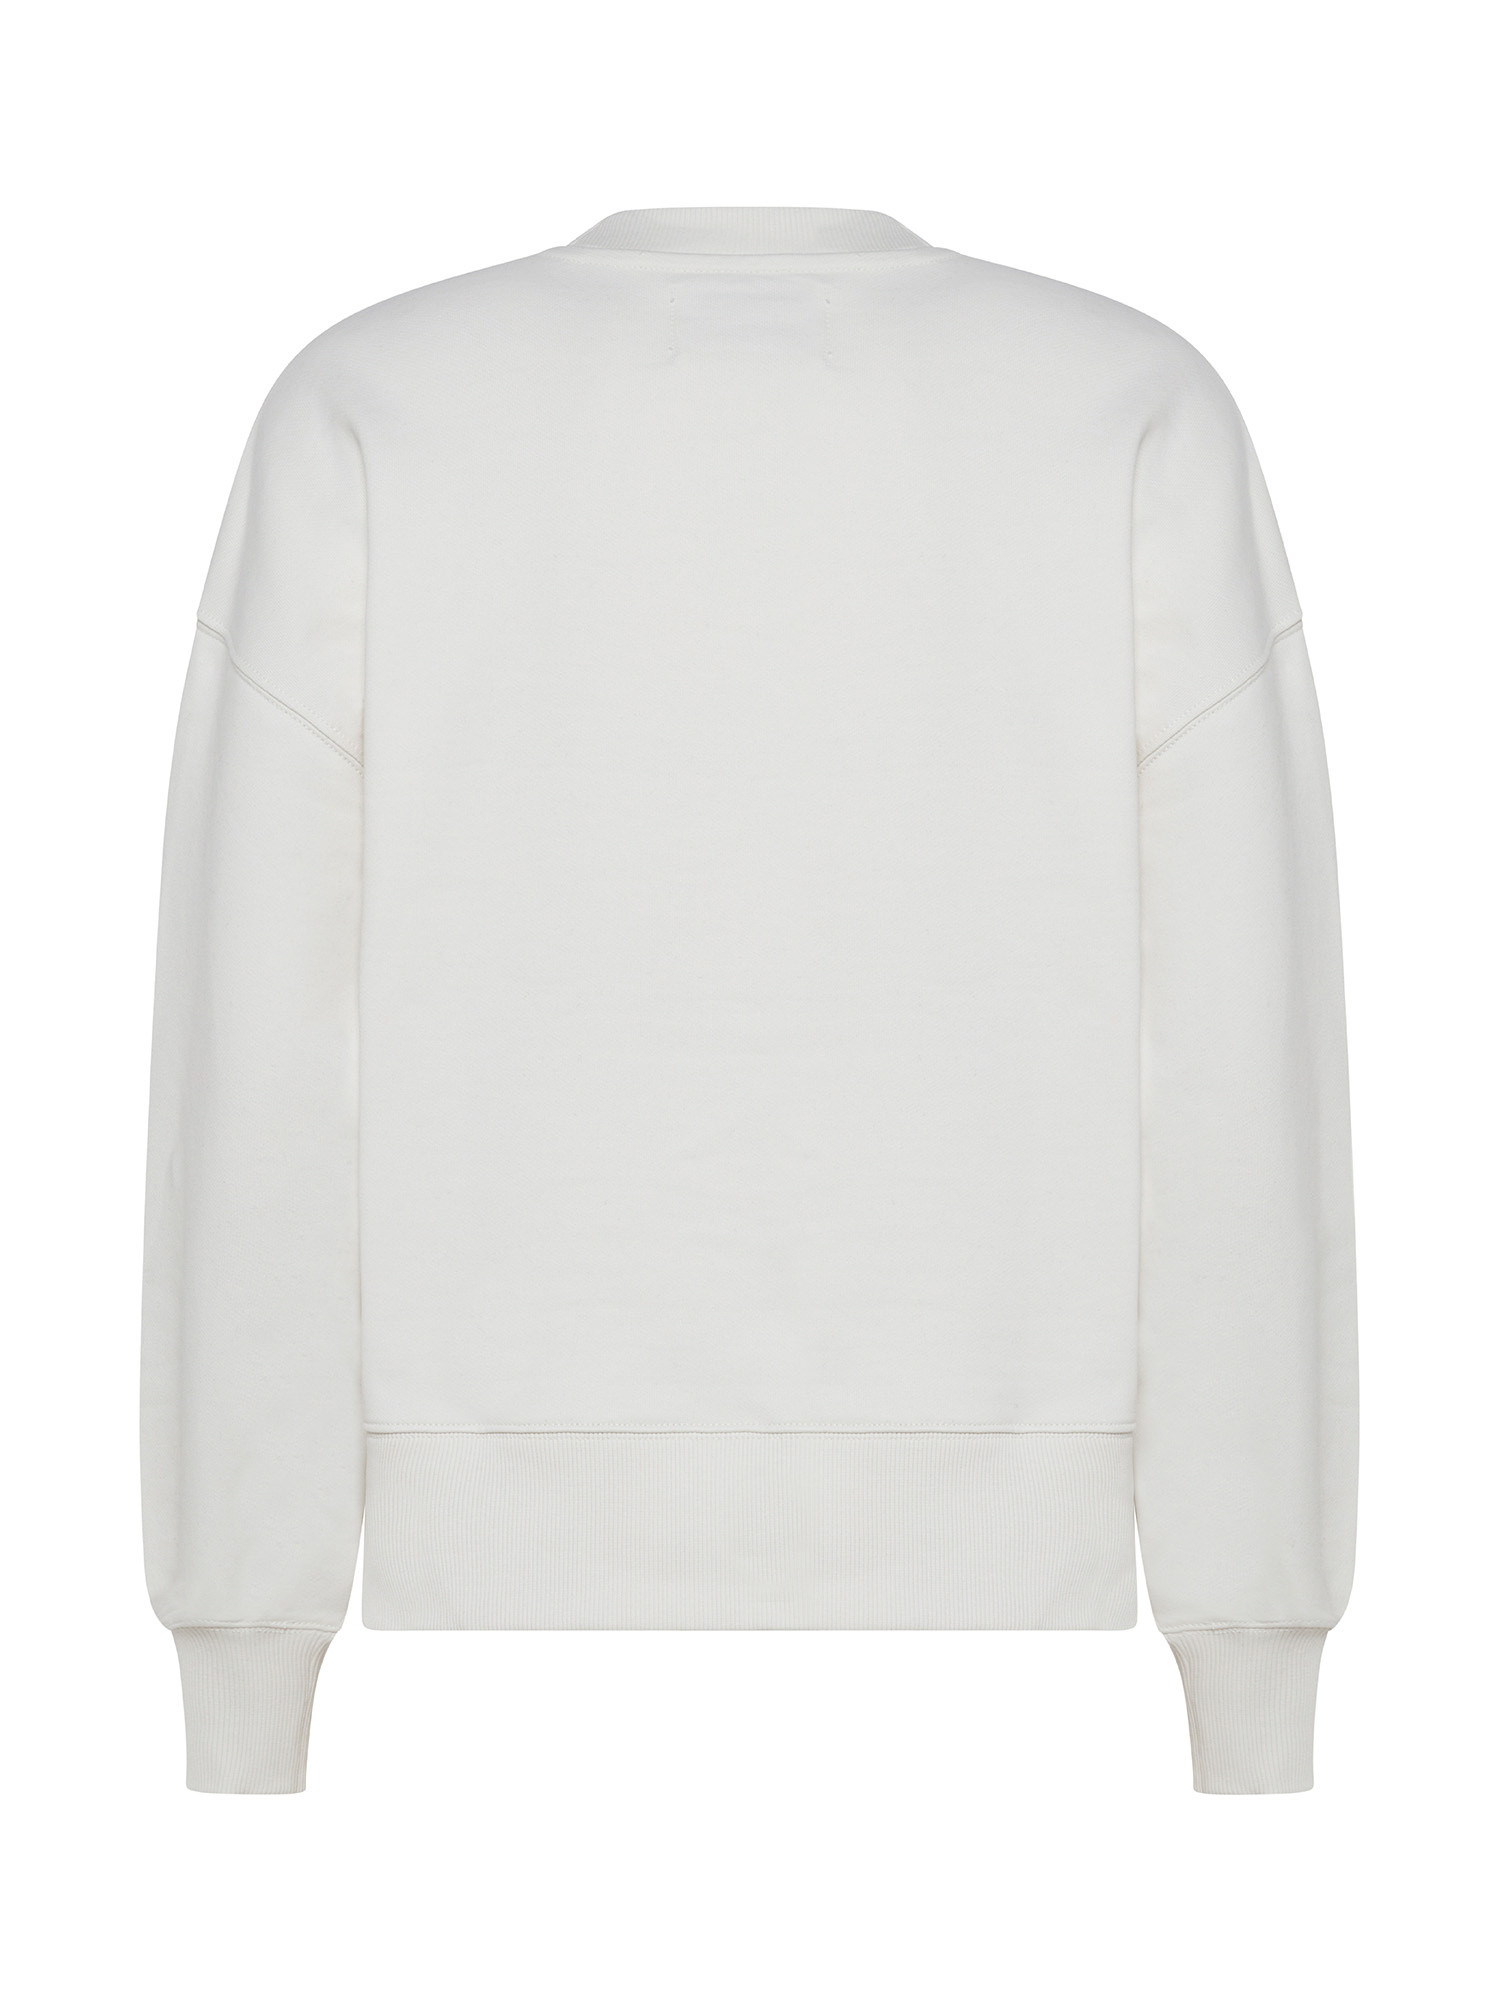 Calvin Klein Jeans - Cotton sweatshirt with logo, White Ivory, large image number 1